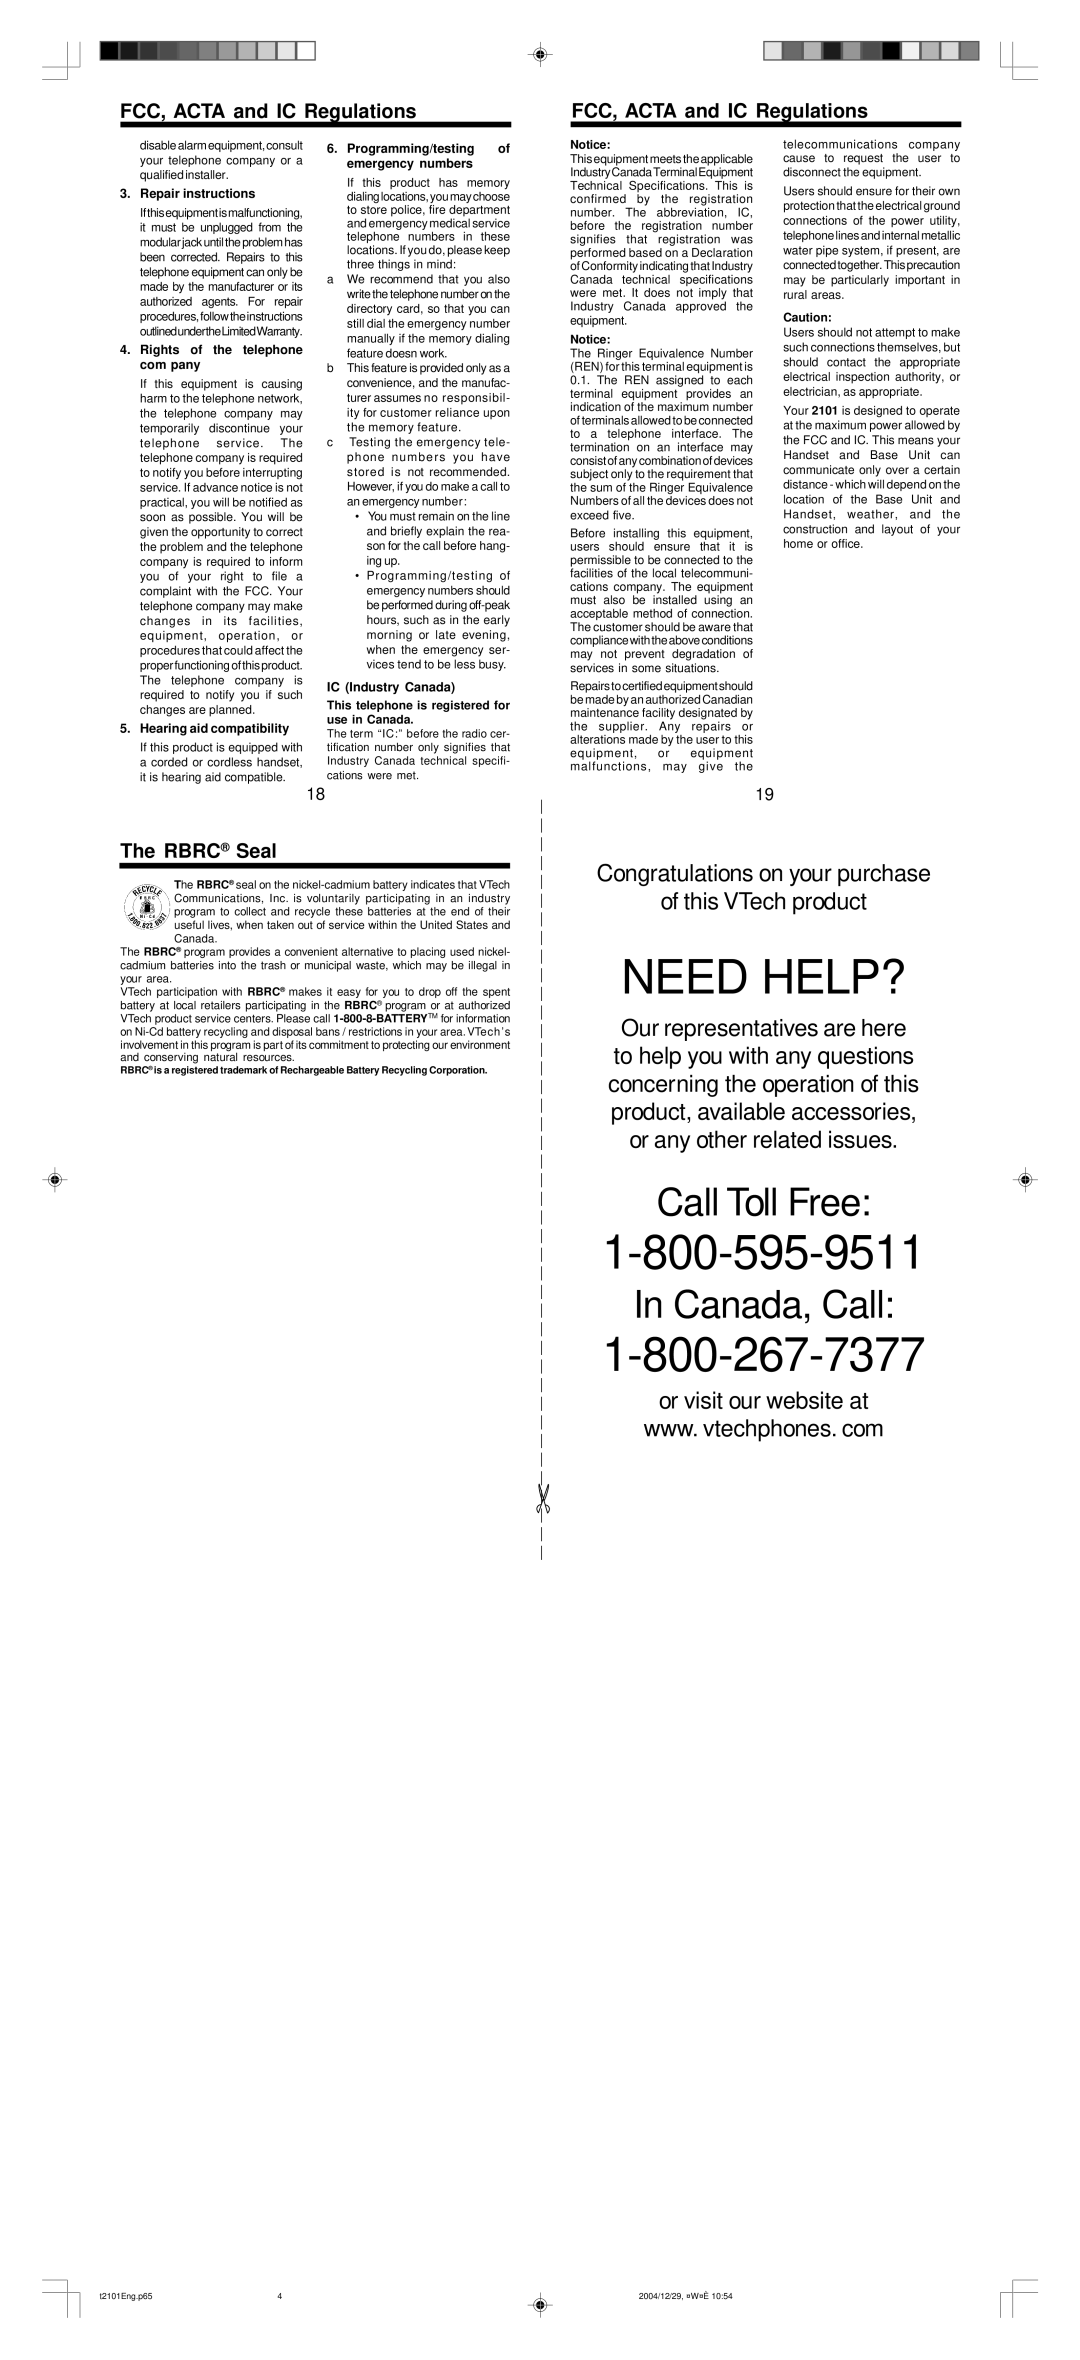 VTech 2101 user manual The RBRC Seal, Need Help?, Call Toll Free, In Canada, Call, or visit our website at 